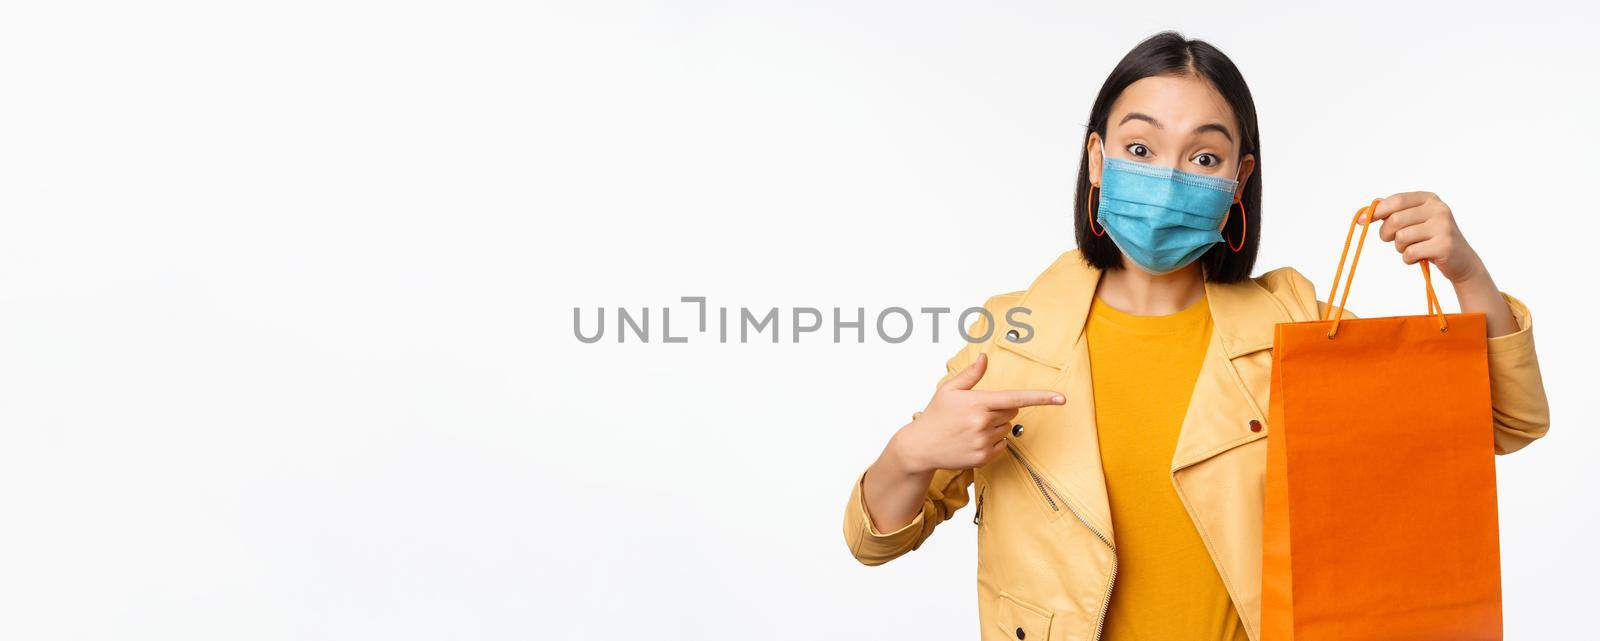 Covid-19 and shop concept. Young asian stylish woman, wearing medical face mask, holding shopping bag, going in malls during pandemic, white background.